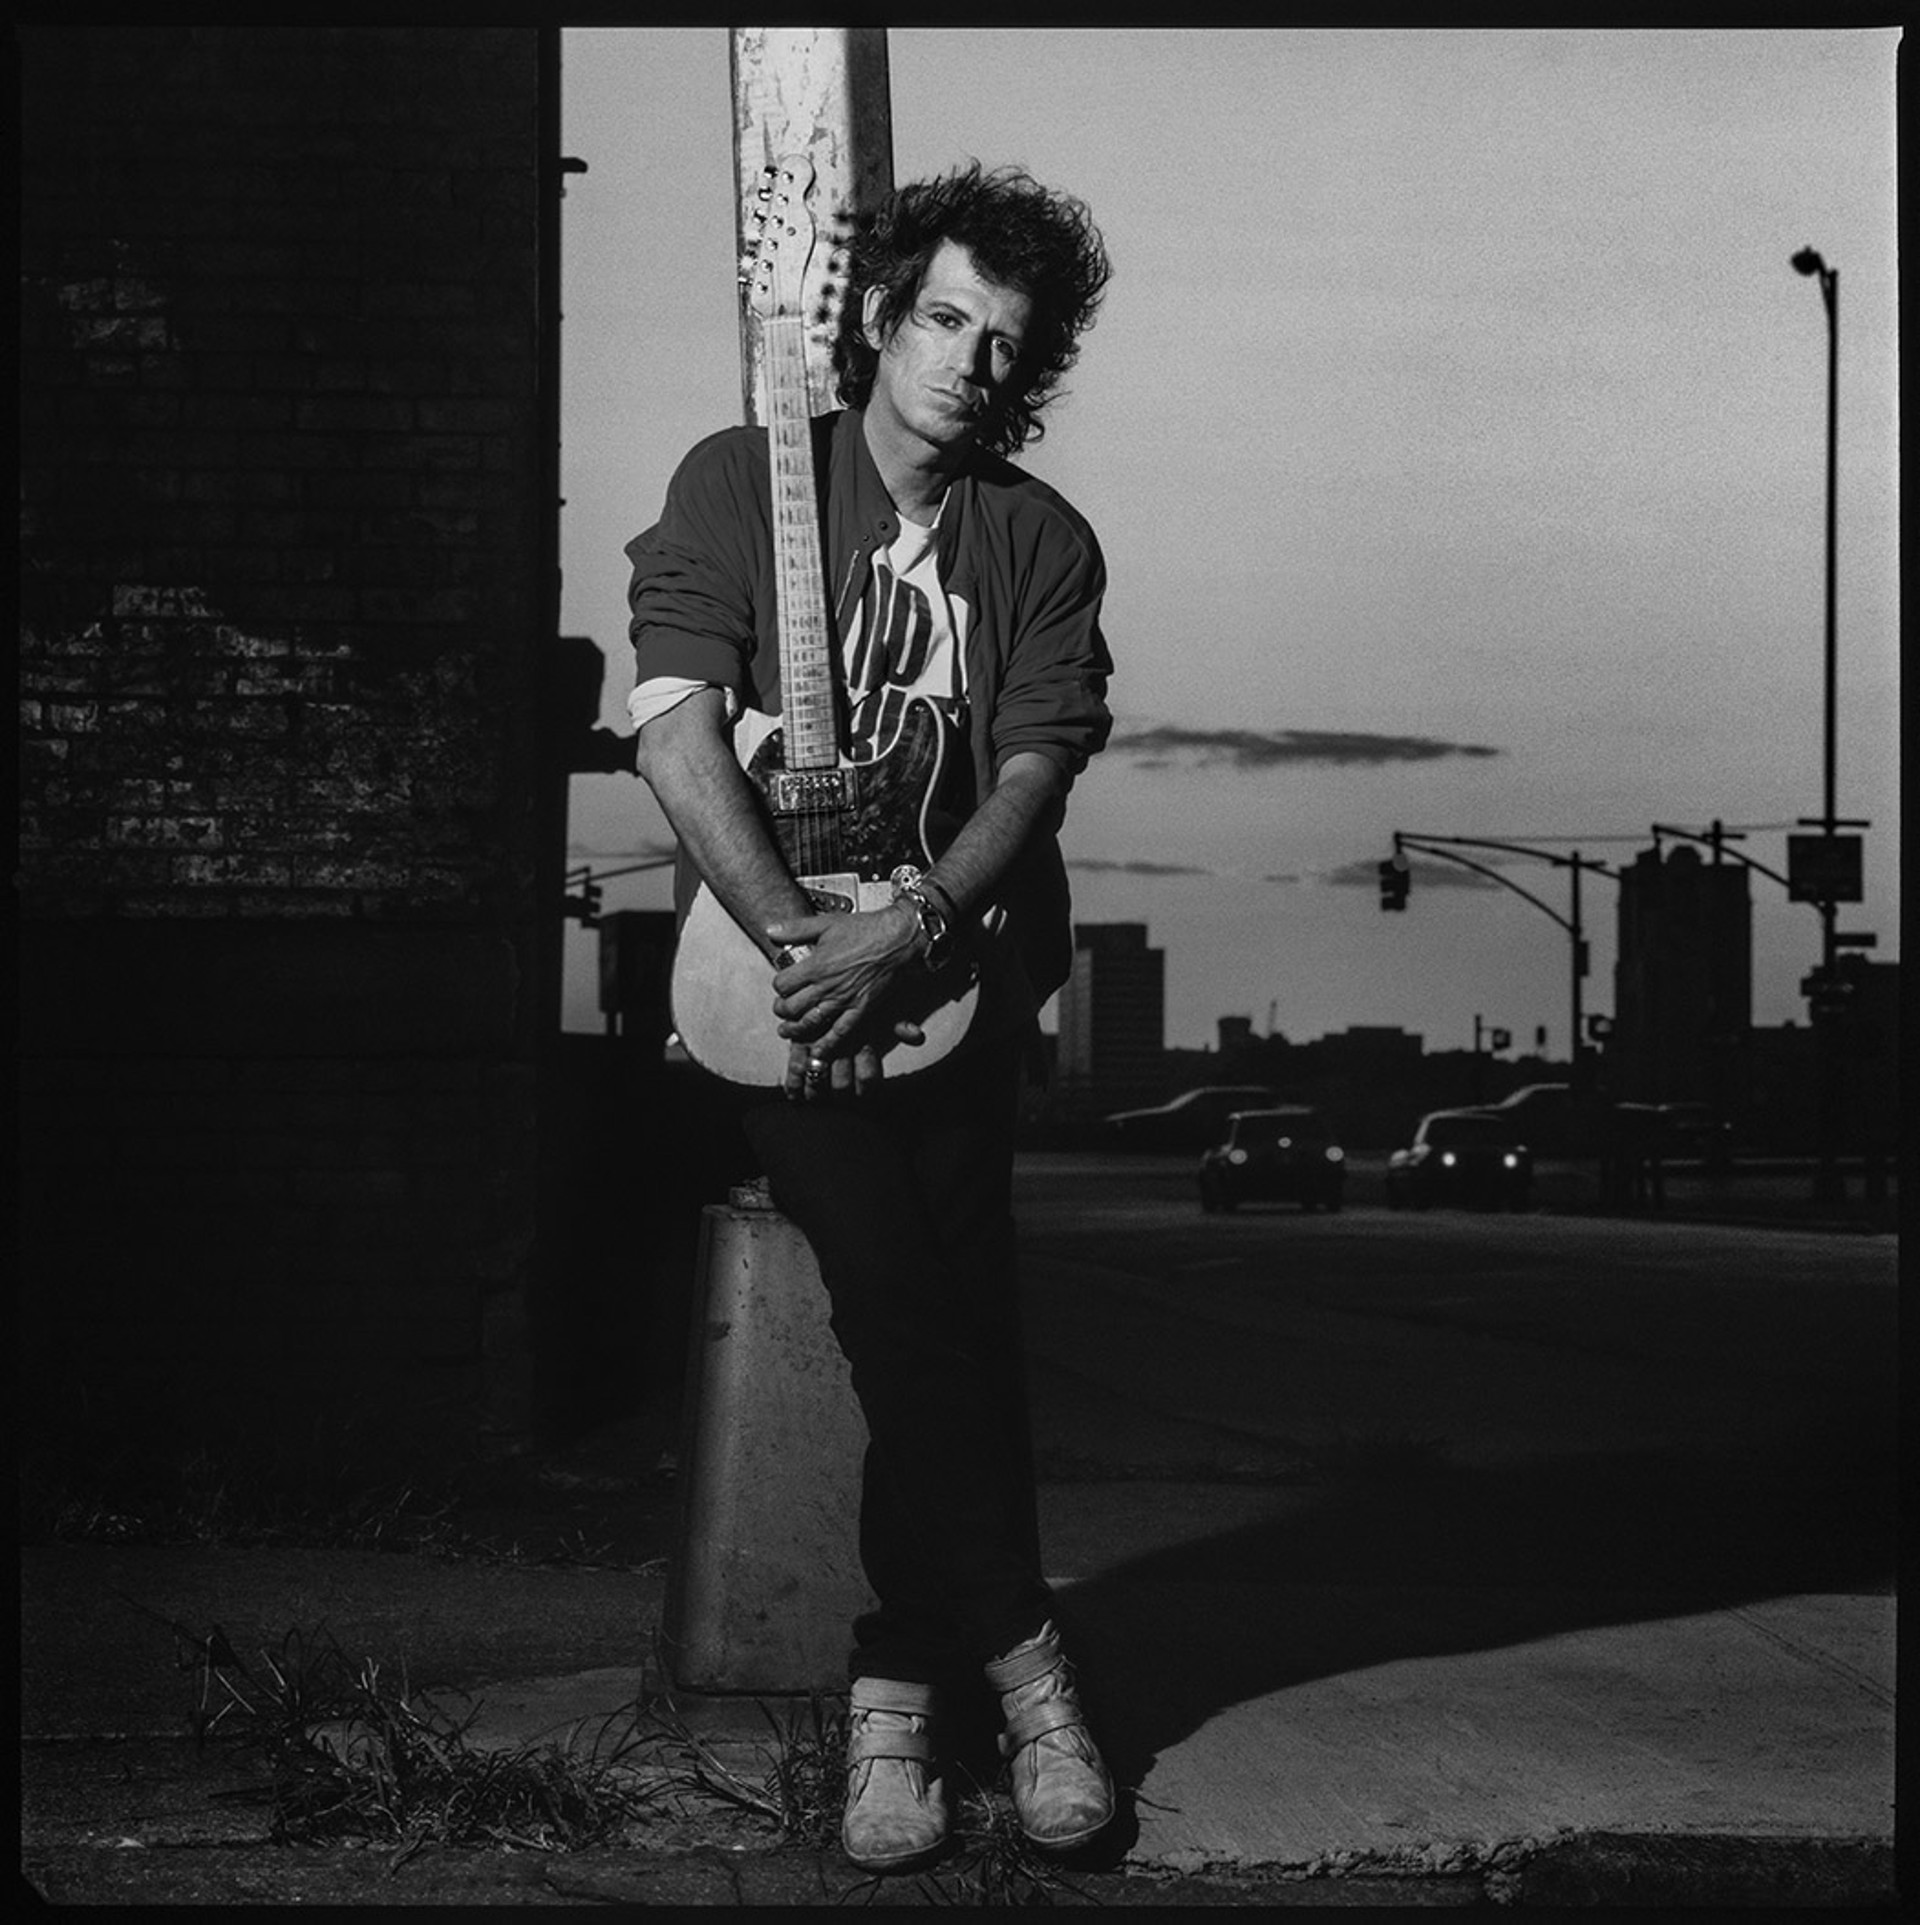 88146 Keith Richards Holding Guitar With Tilted Head BW by Timothy White